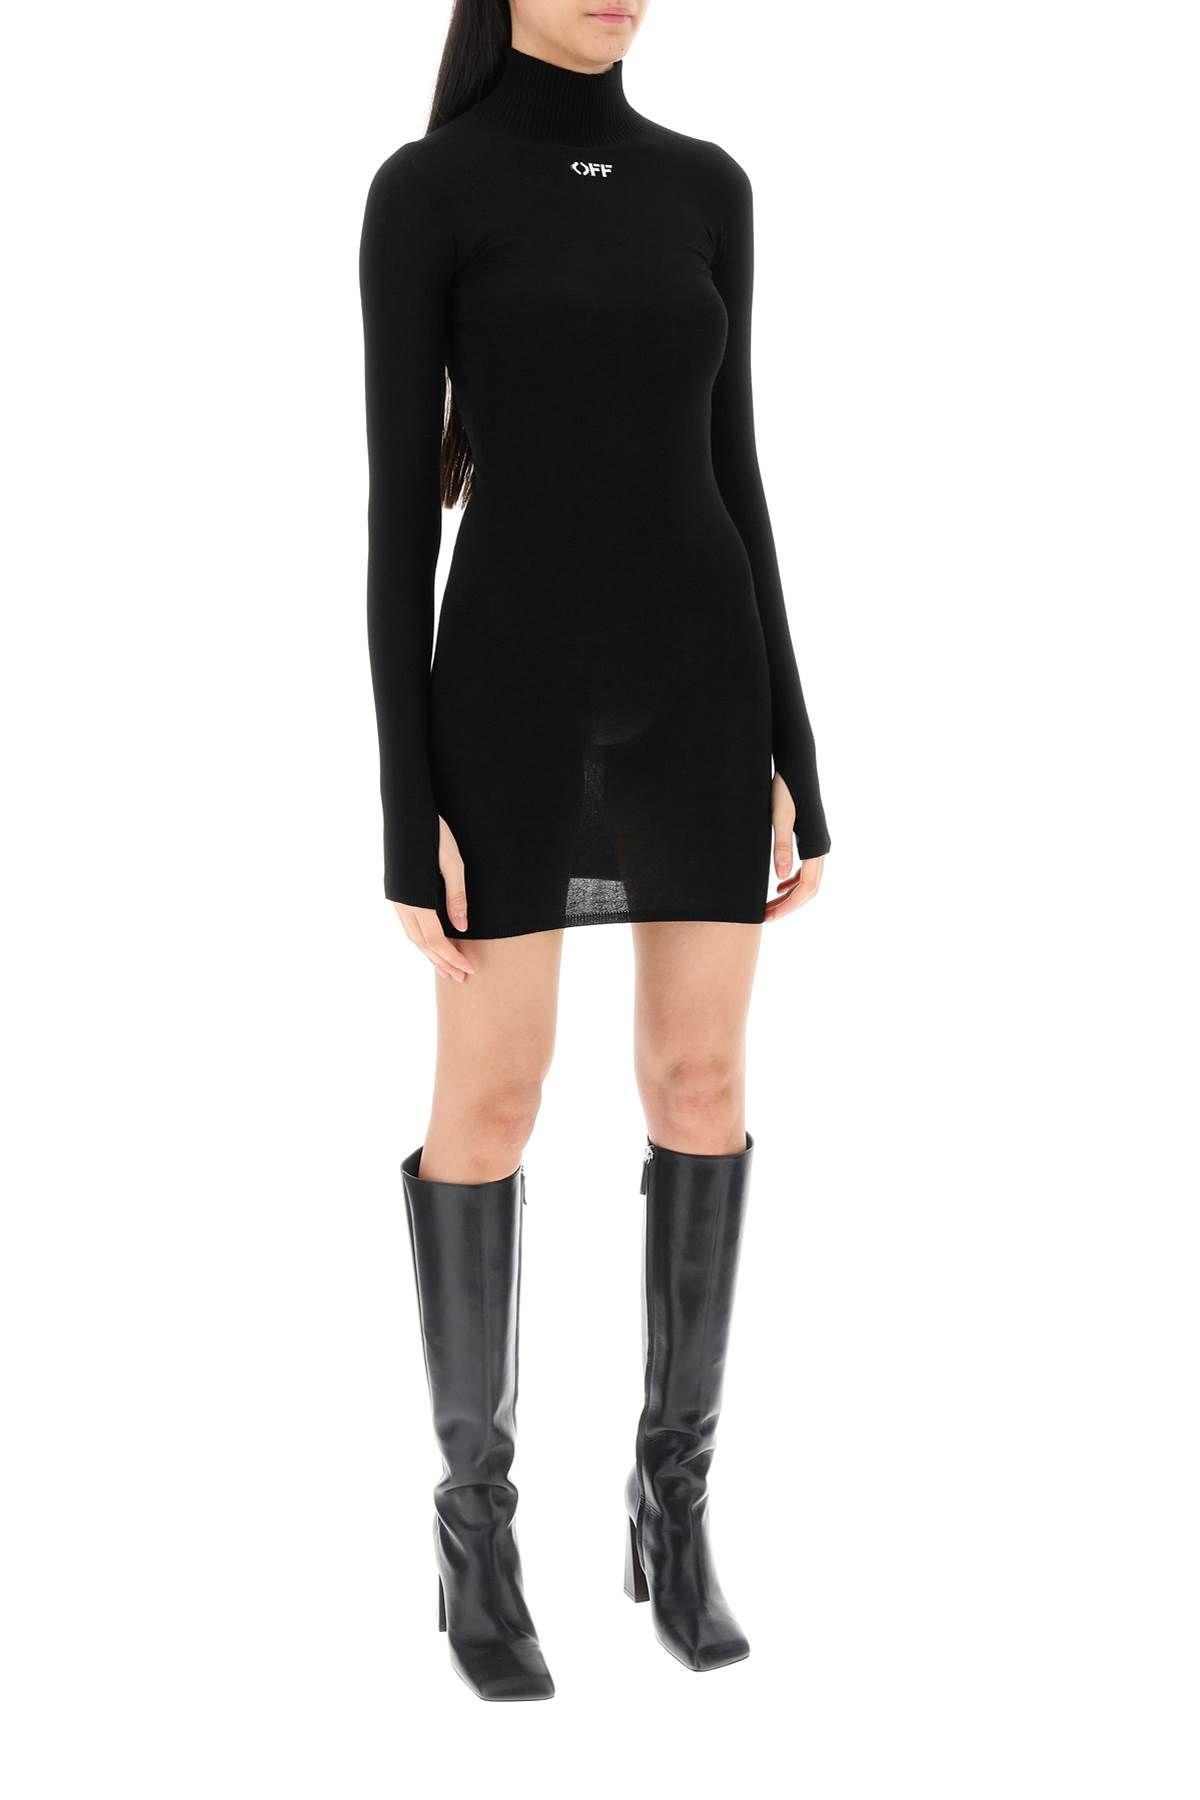 Knitted mini dress with OFF logo Off-white - 3